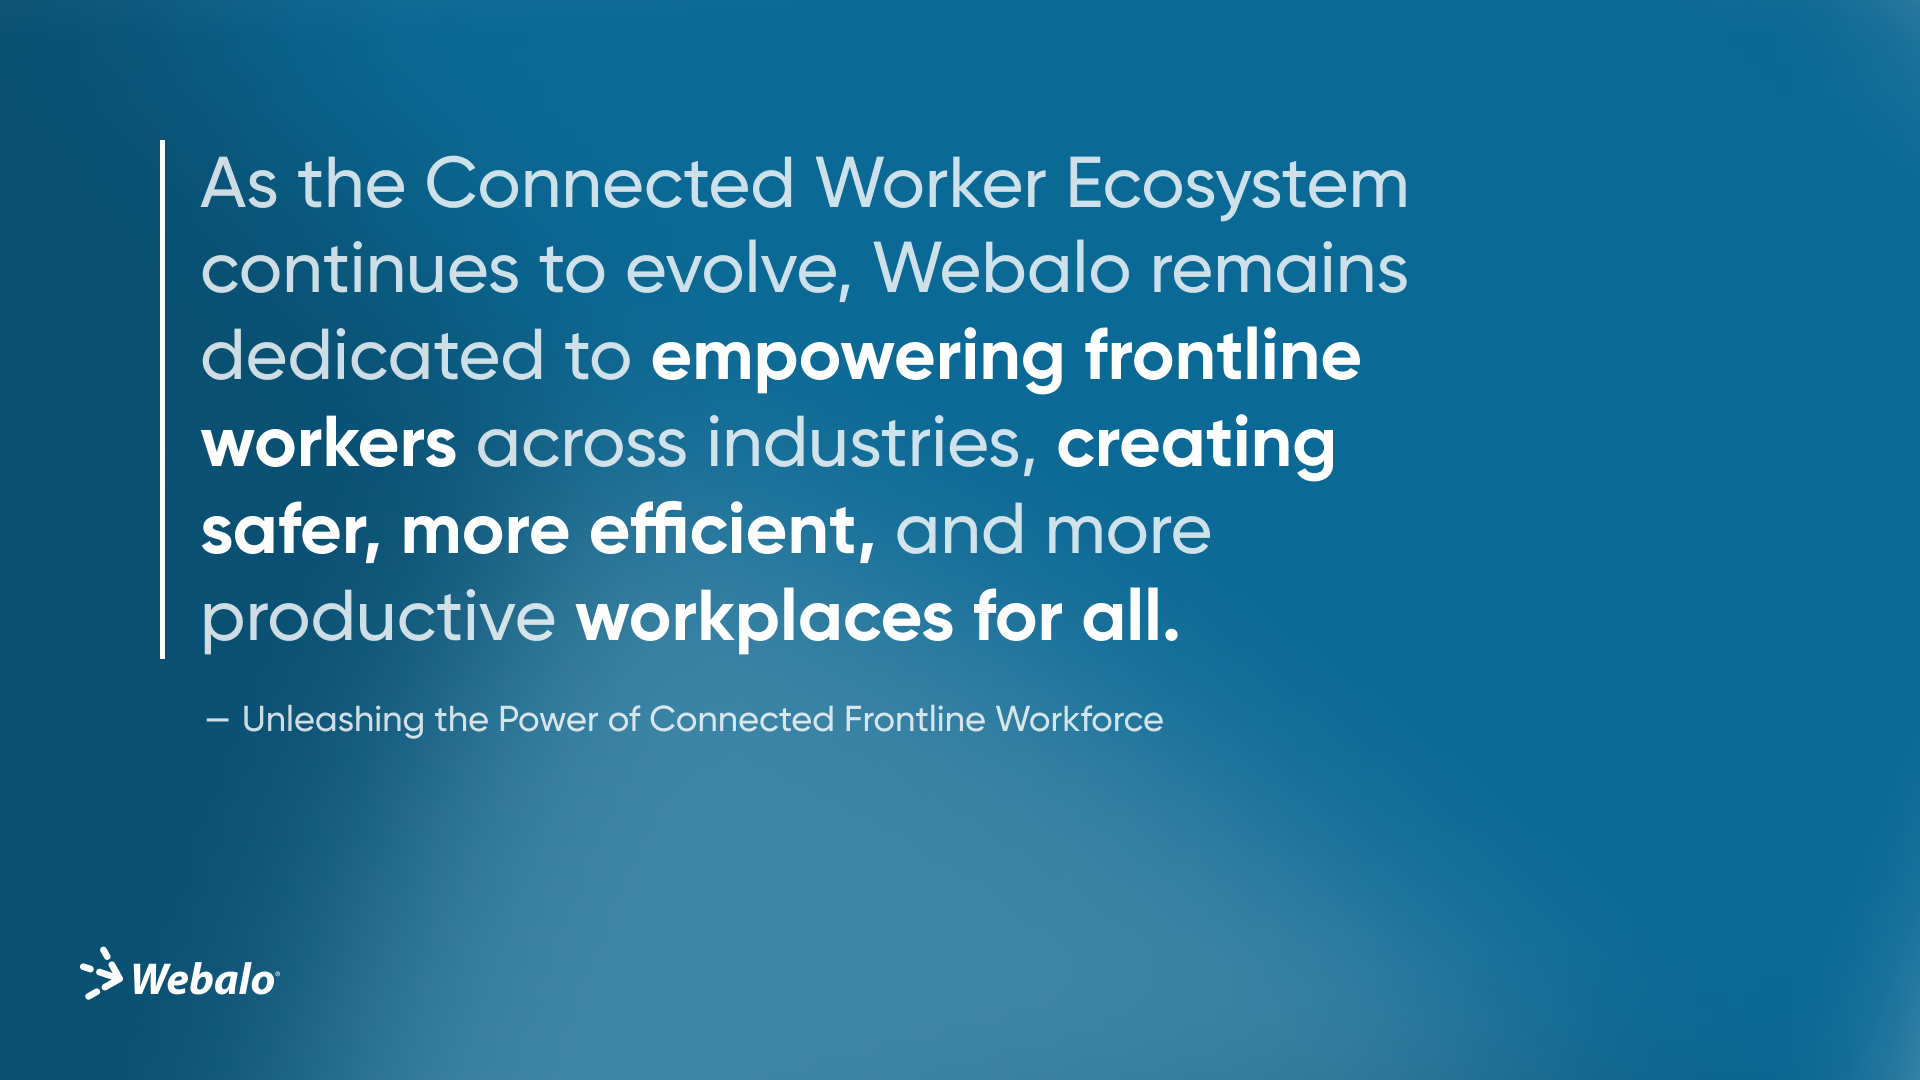 Unleashing the Power of Connected Frontline Workforce